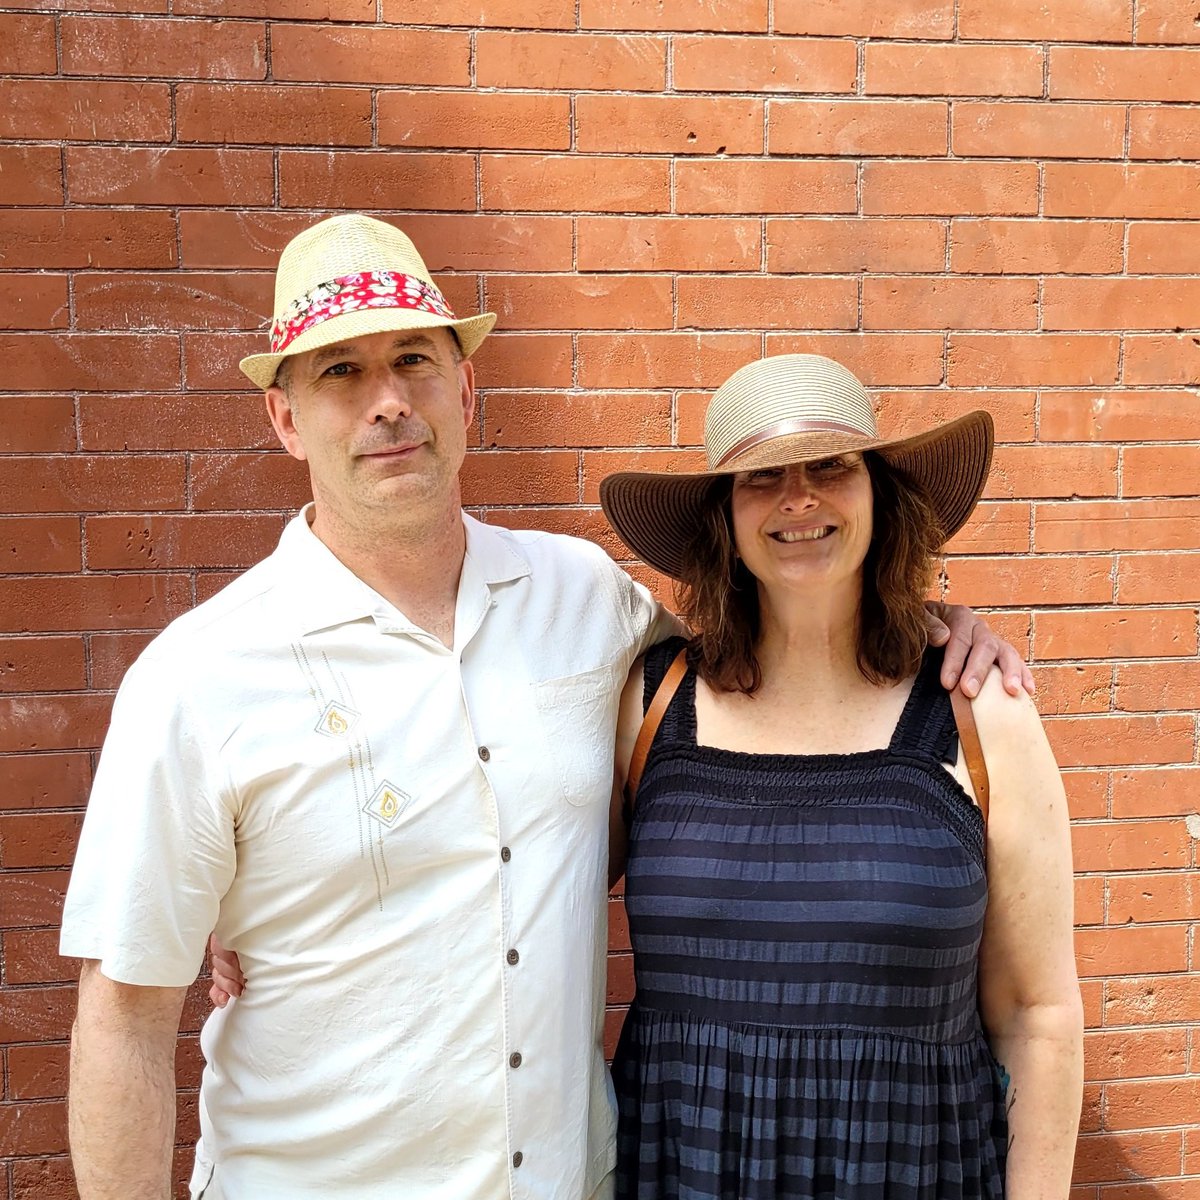 Summer heat in New hats. 
#thehablovesyou #thanksforthesupport #hats #hatoftheday #hataddict #peopleareimportant #community #menshats #ladieshats #exchangedistrict #shopsmall